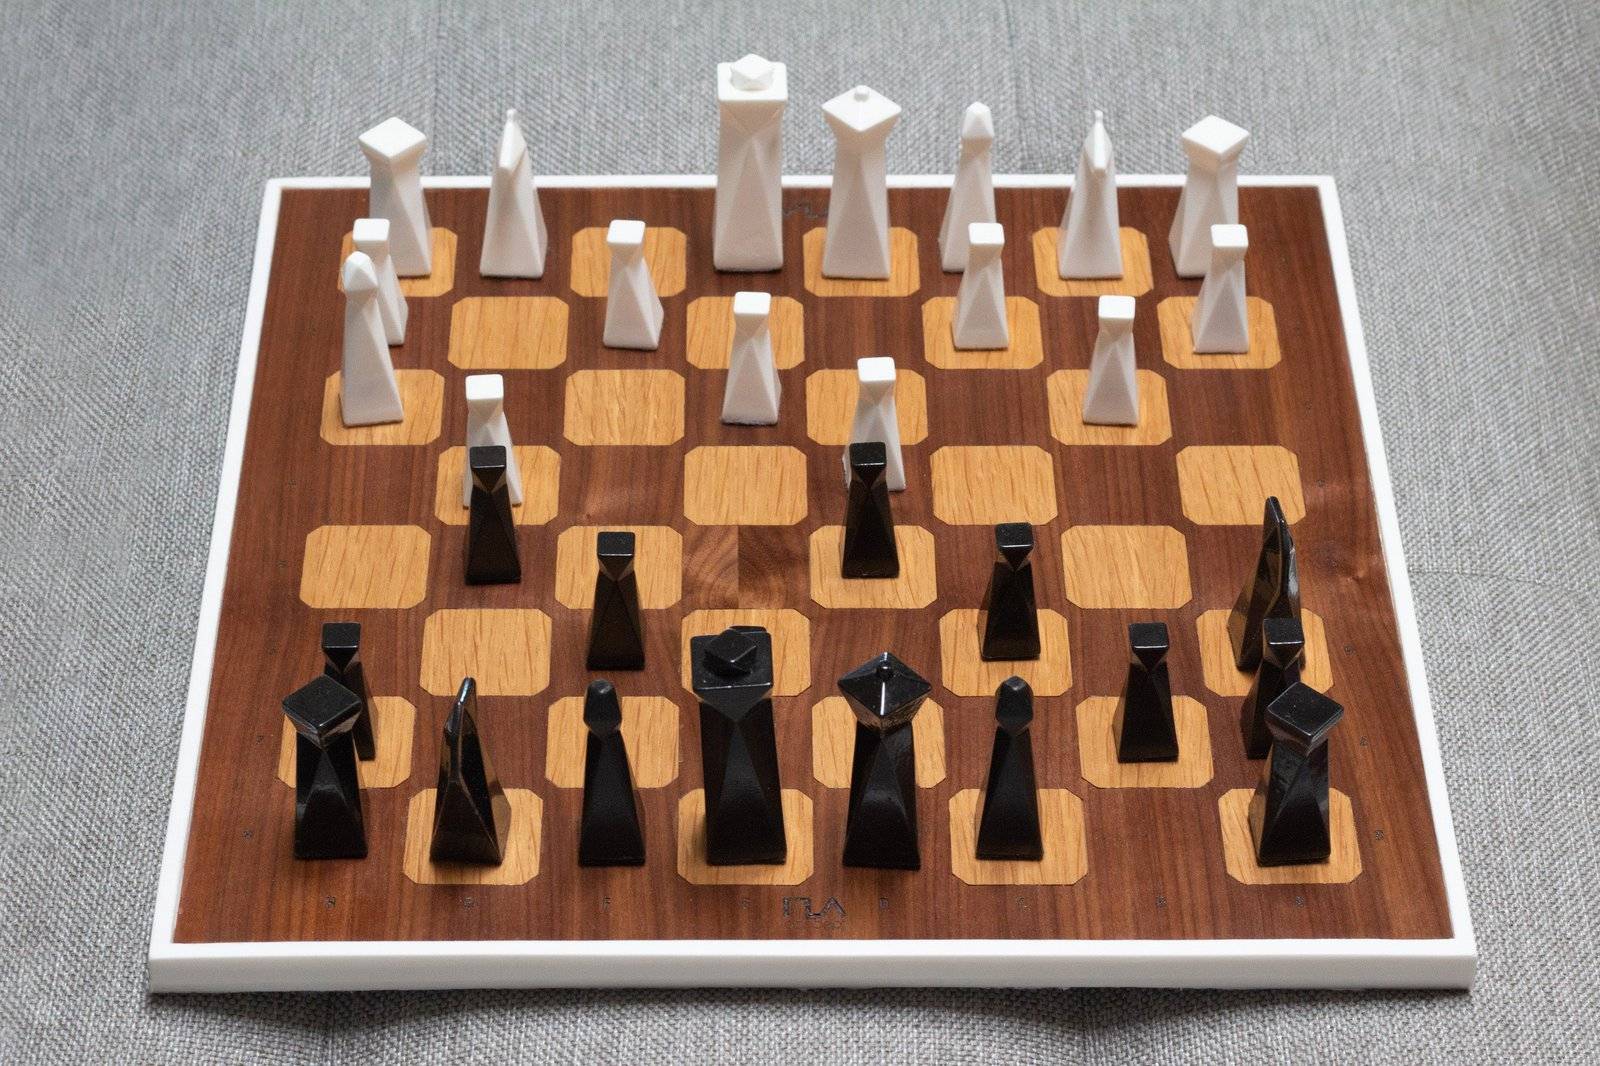 All Chess Boards and Chess Game Sets in Chess